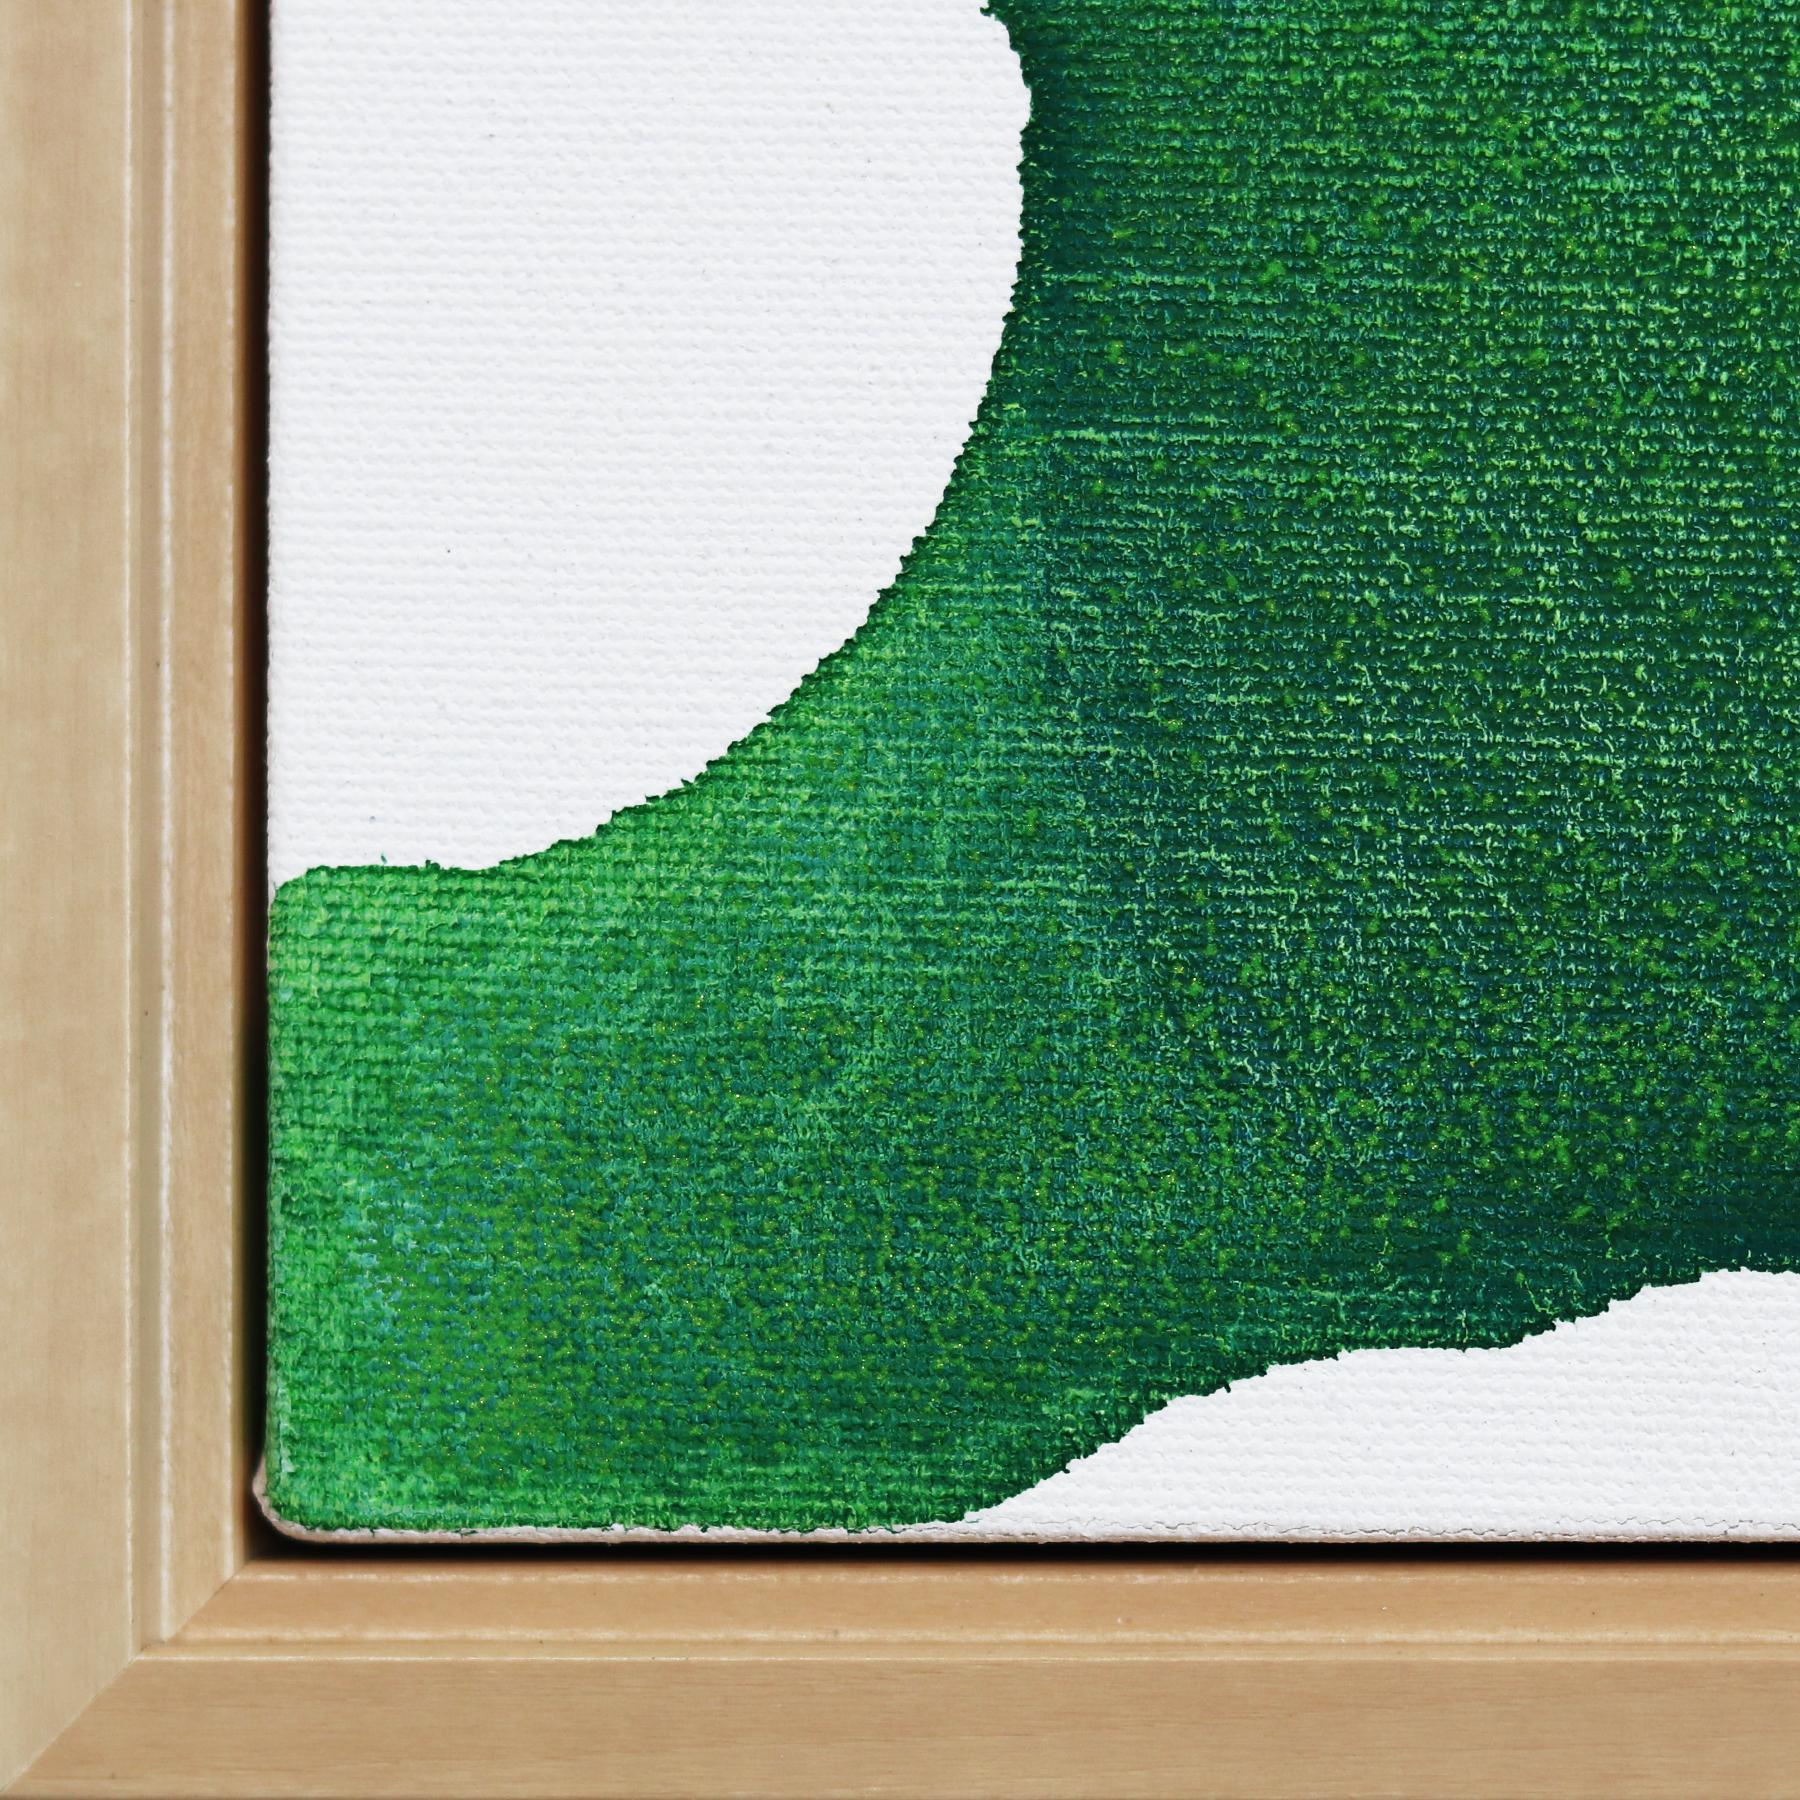 Happy Times - Framed Original Green Minimalist Abstract Contemporary Art For Sale 5